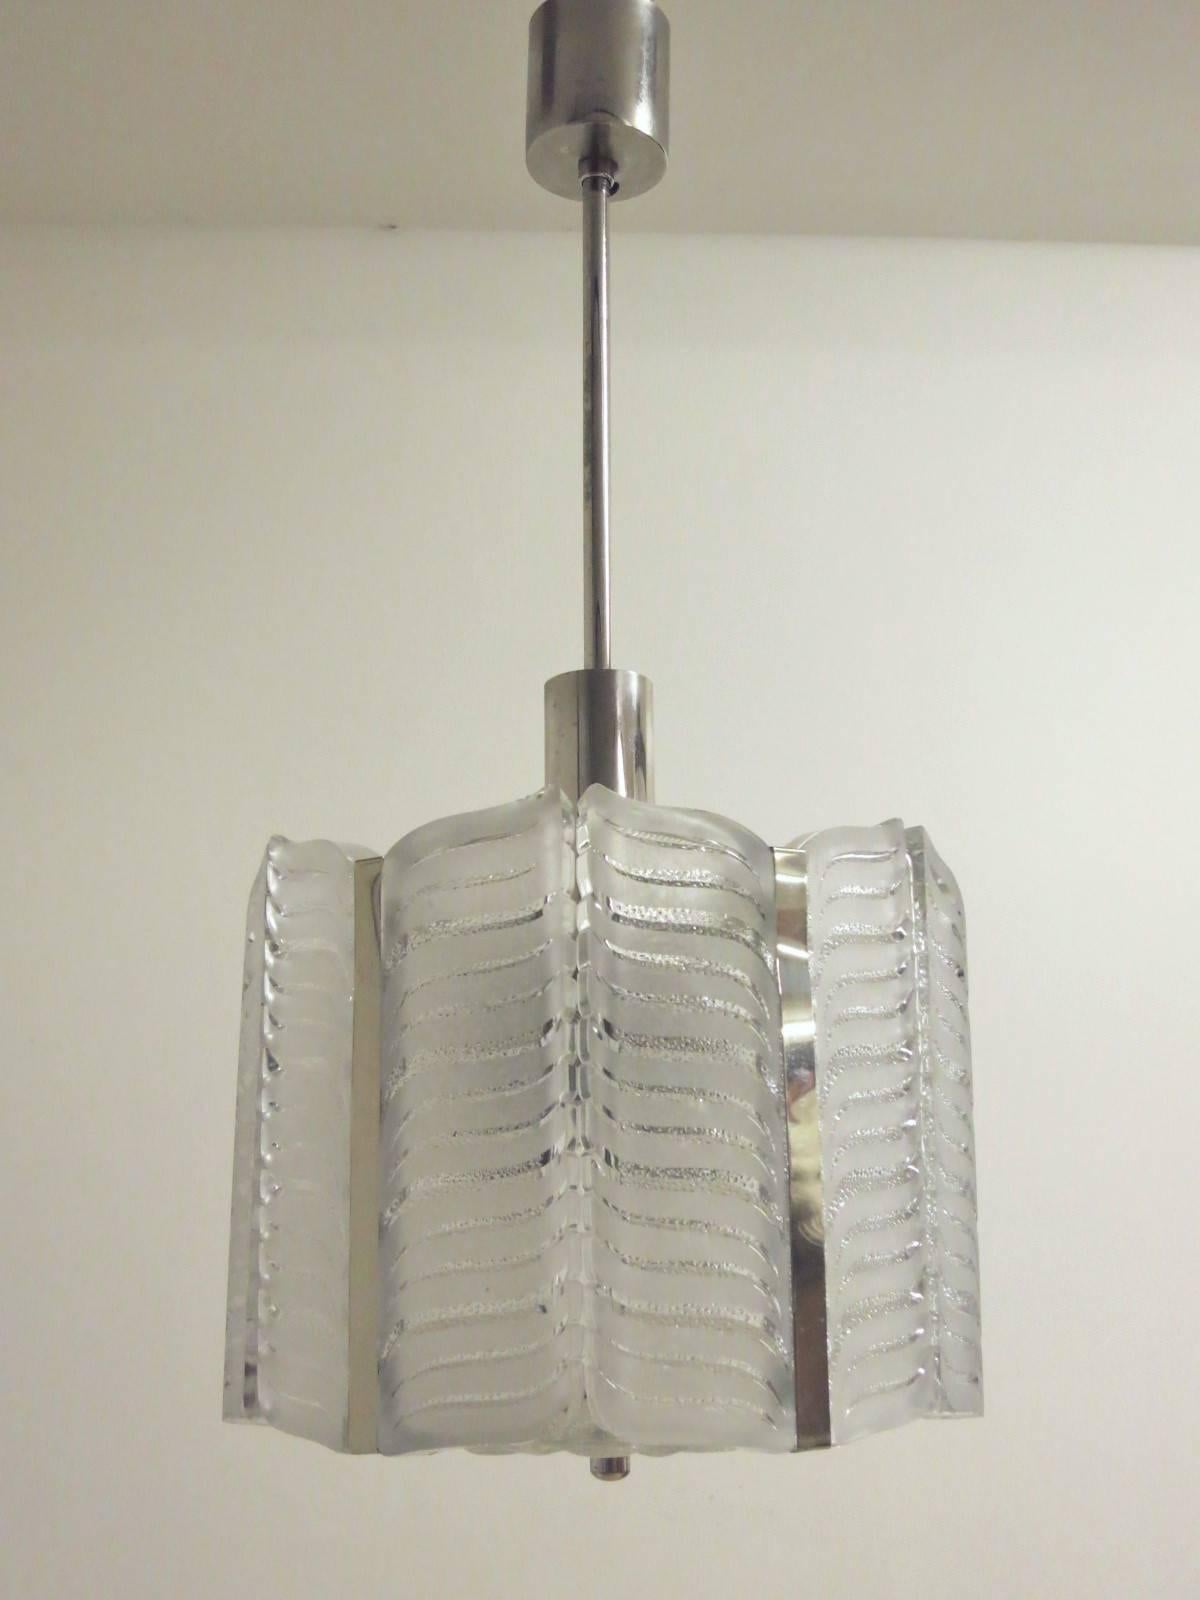 Vintage Italian pendant composed of 6 hand blown frosted glass panels with leaf like design and textured pebbled glass base, mounted on nickel frame / Designed by Kalmar circa 1960’s / Made in Austria
3 lights / E26 or E27 type / max 60W